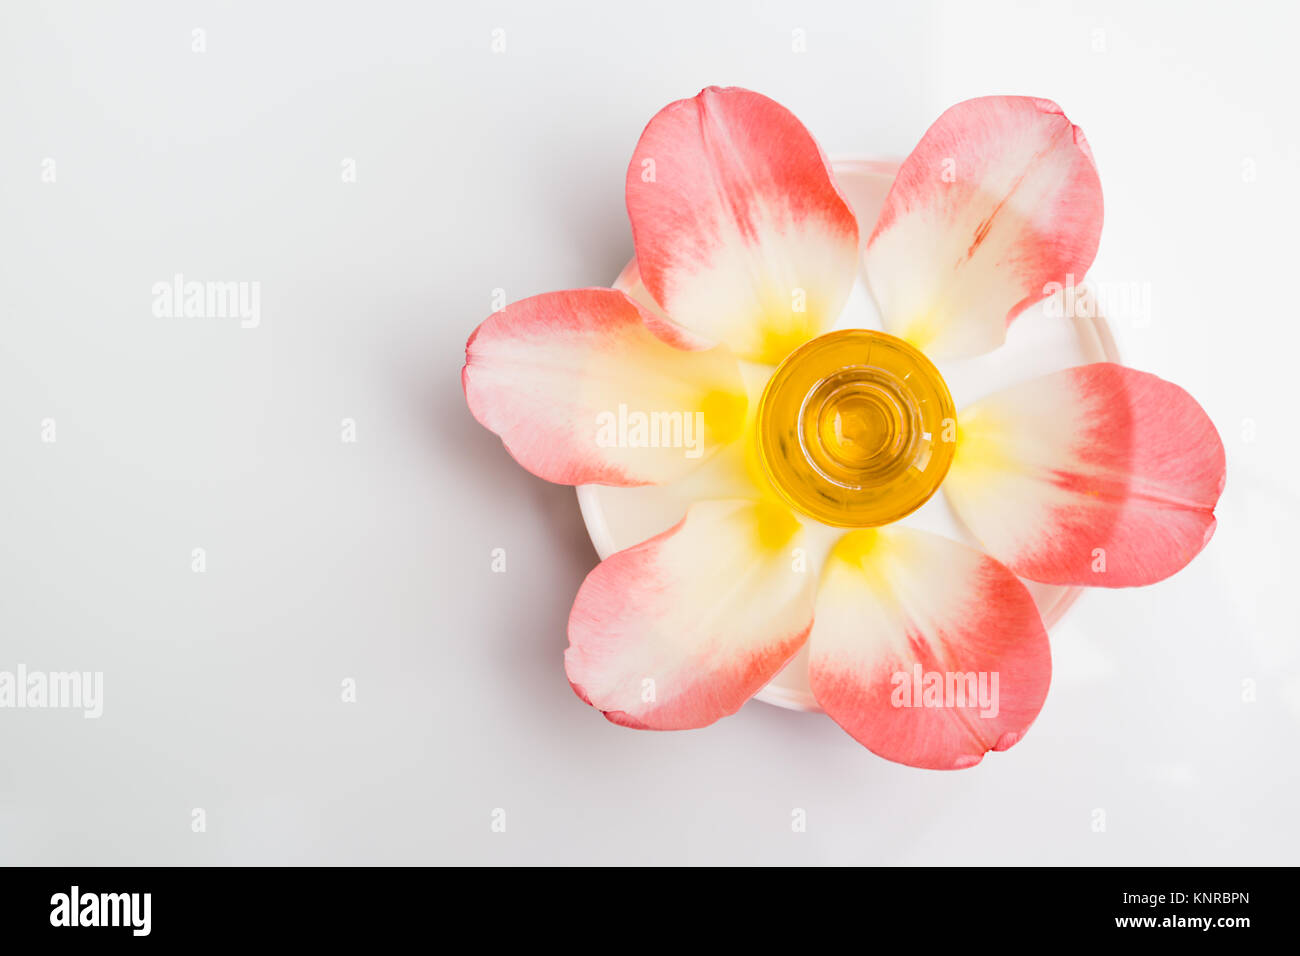 Rose aromatherapy oil. Dropper bottle on plate with tender pink petals and flower, top view. Stock Photo